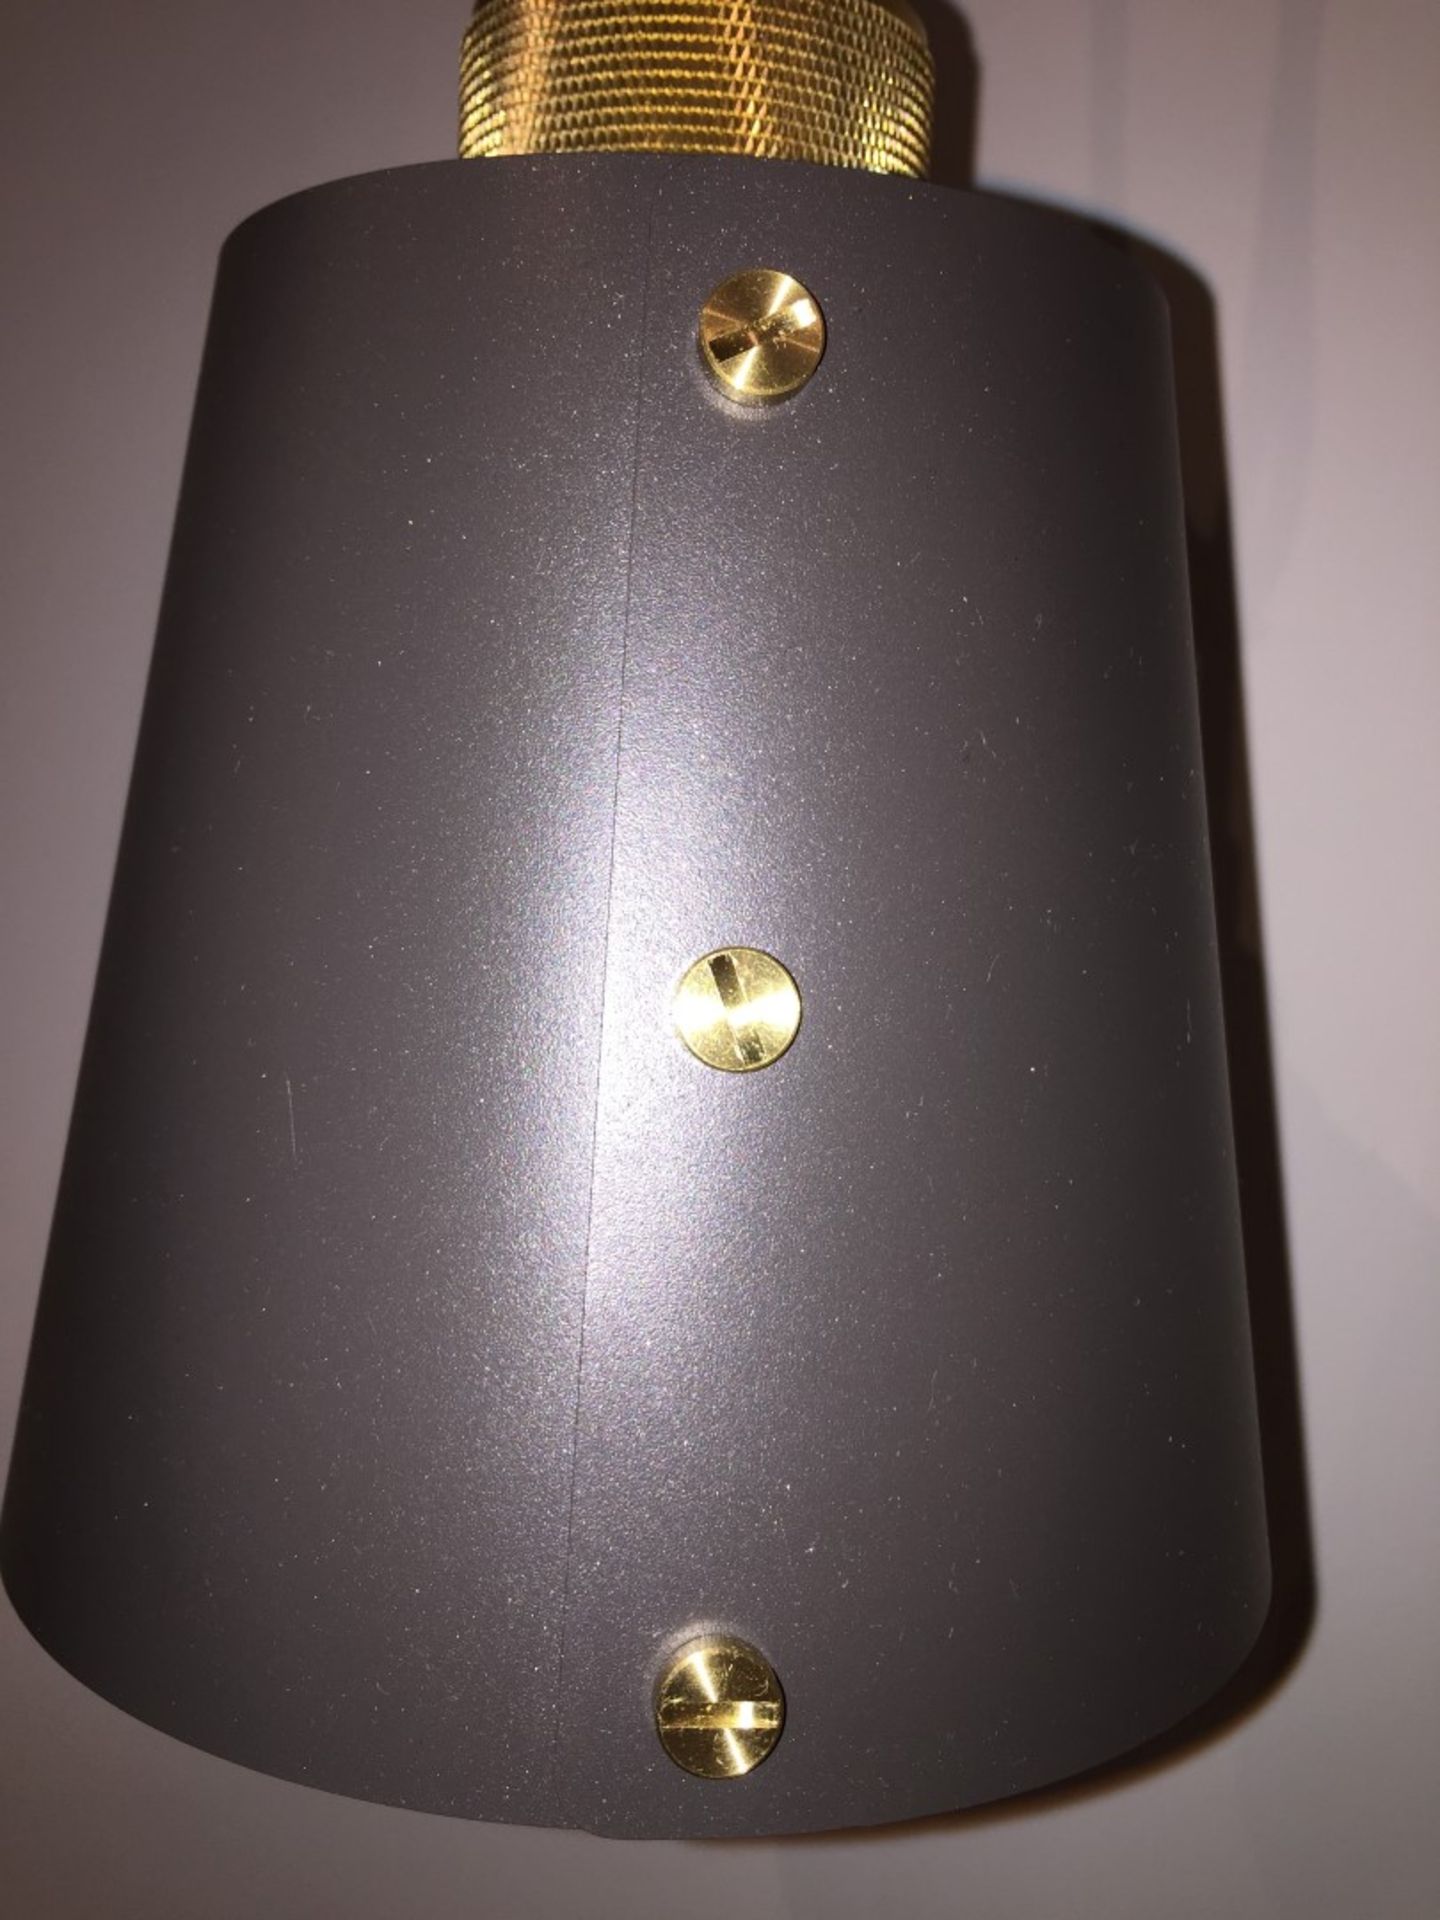 1 x BUSTER + PUNCH Hooked Wall Light With Metal Shade - Ref: WS/FF160H - CL204 - Location: London Ci - Image 8 of 10